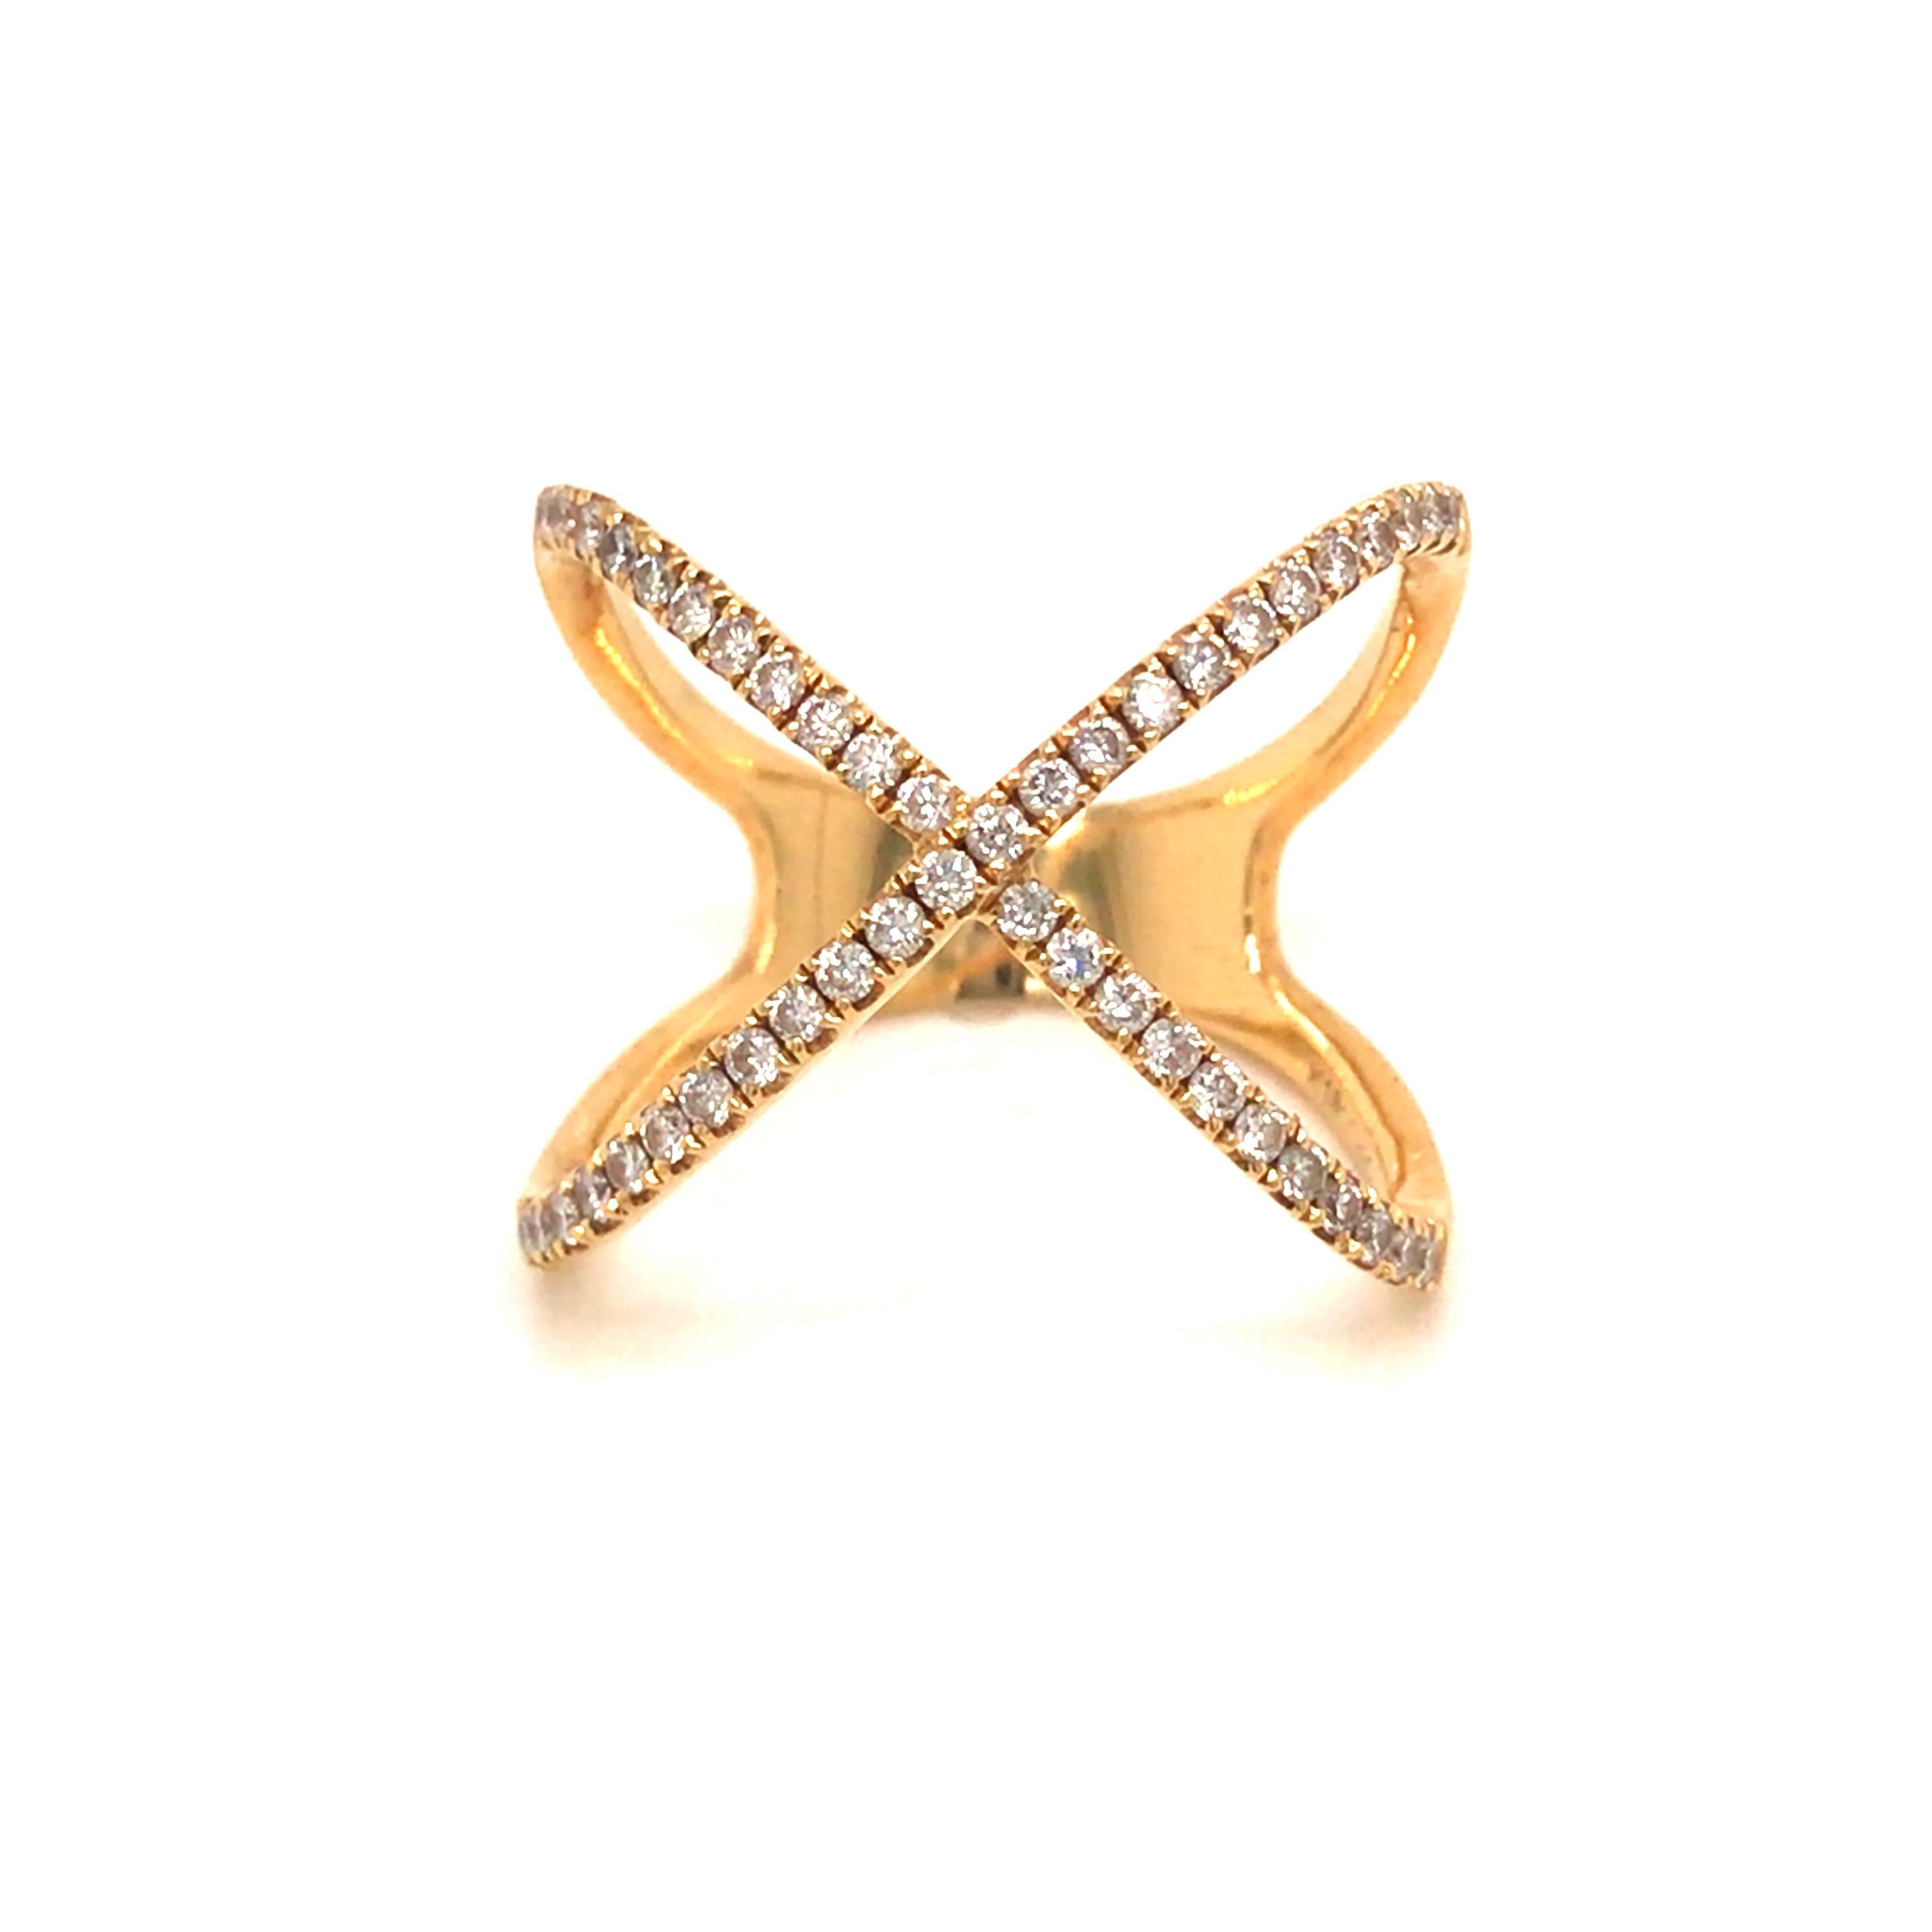 Diamond Open Space 'X' Ring in 18K Yellow Gold.  (46) Round Brilliant Cut Diamonds weighing 0.38 carat total weight, G-H in color and VS-SI in clarity are expertly set.  The Ring measures 3/4 inch in width at the widest point.   Ring size 8. 5.28